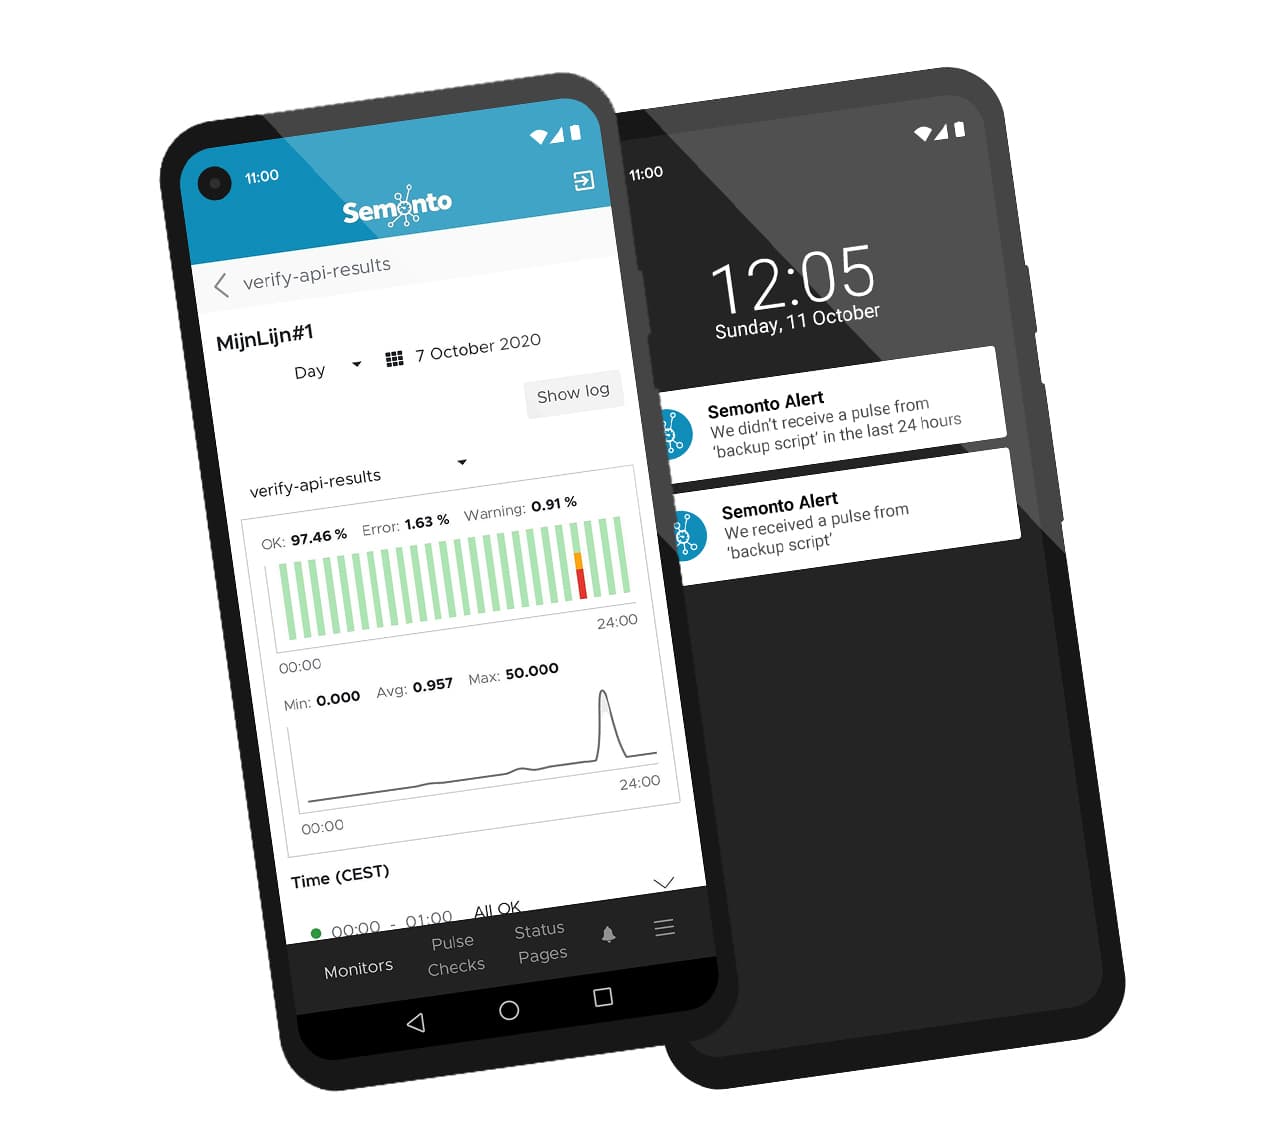 Mockup of the Android app showing test results and push-notifications on Android